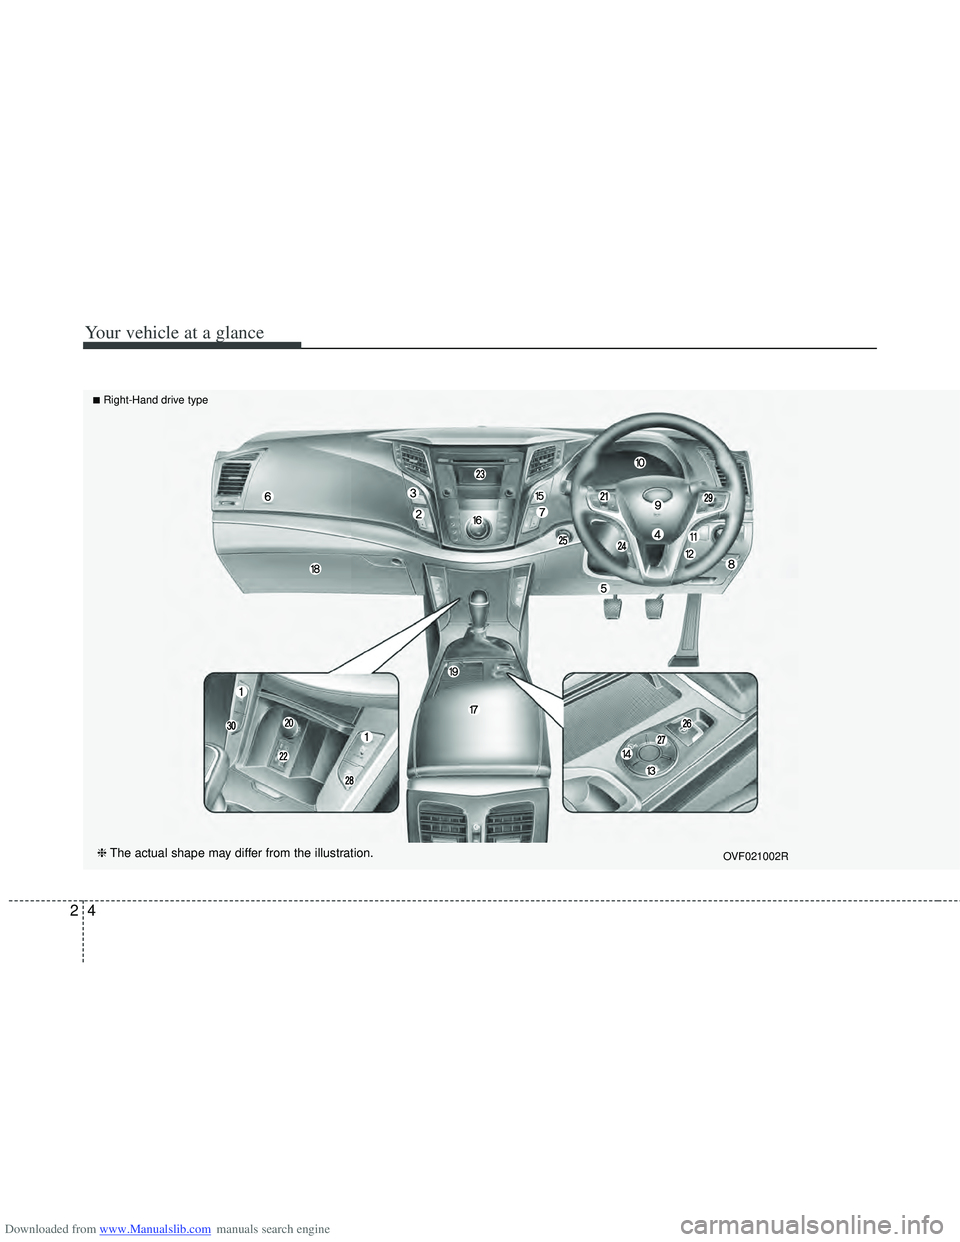 HYUNDAI I40 2011 User Guide Downloaded from www.Manualslib.com manuals search engine Your vehicle at a glance
42
❈The actual shape may differ from the illustration.OVF021002R
■Right-Hand drive type  